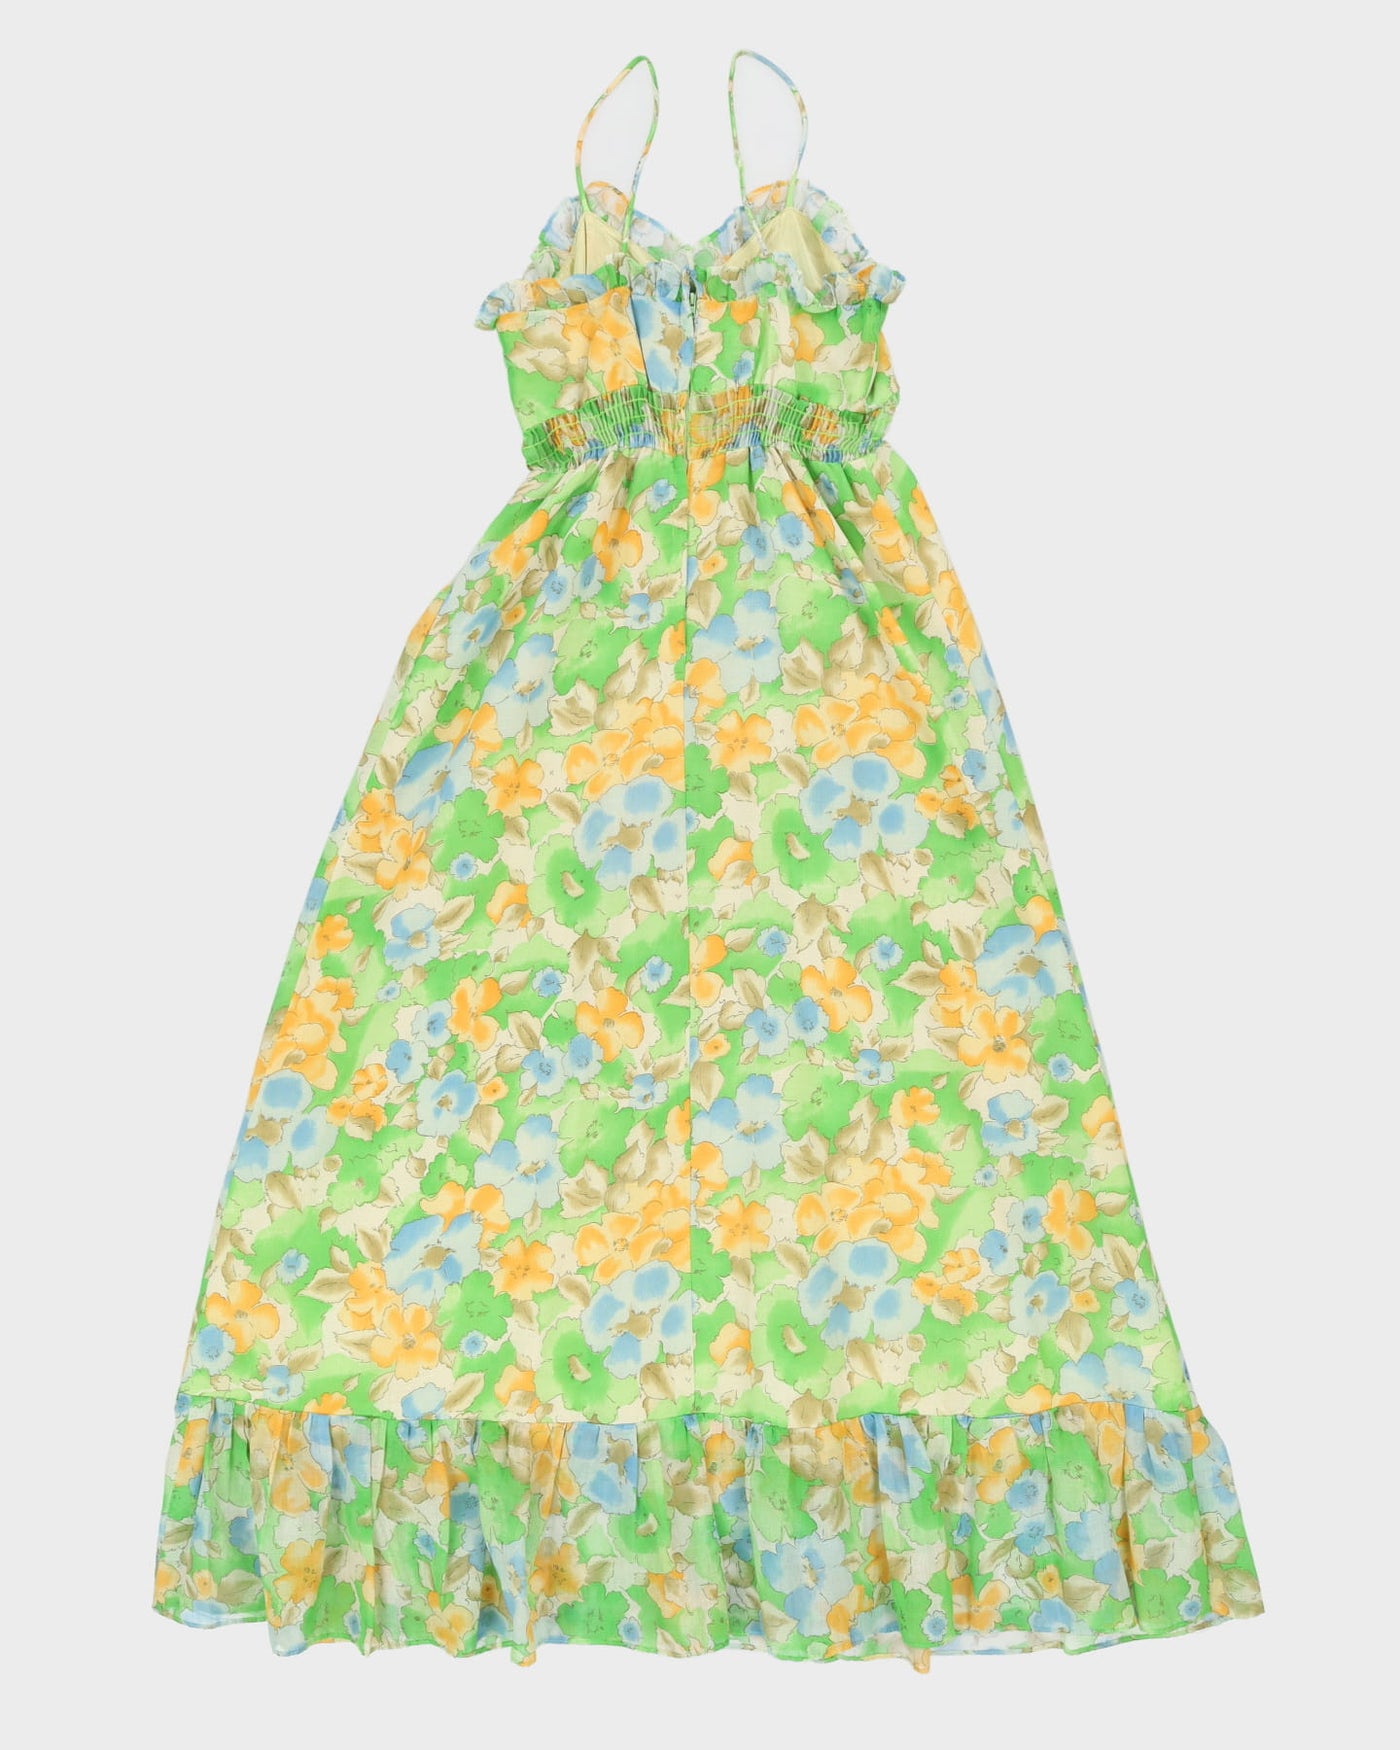 Vintage 1970s Green Floral Sleeveless Dress - S